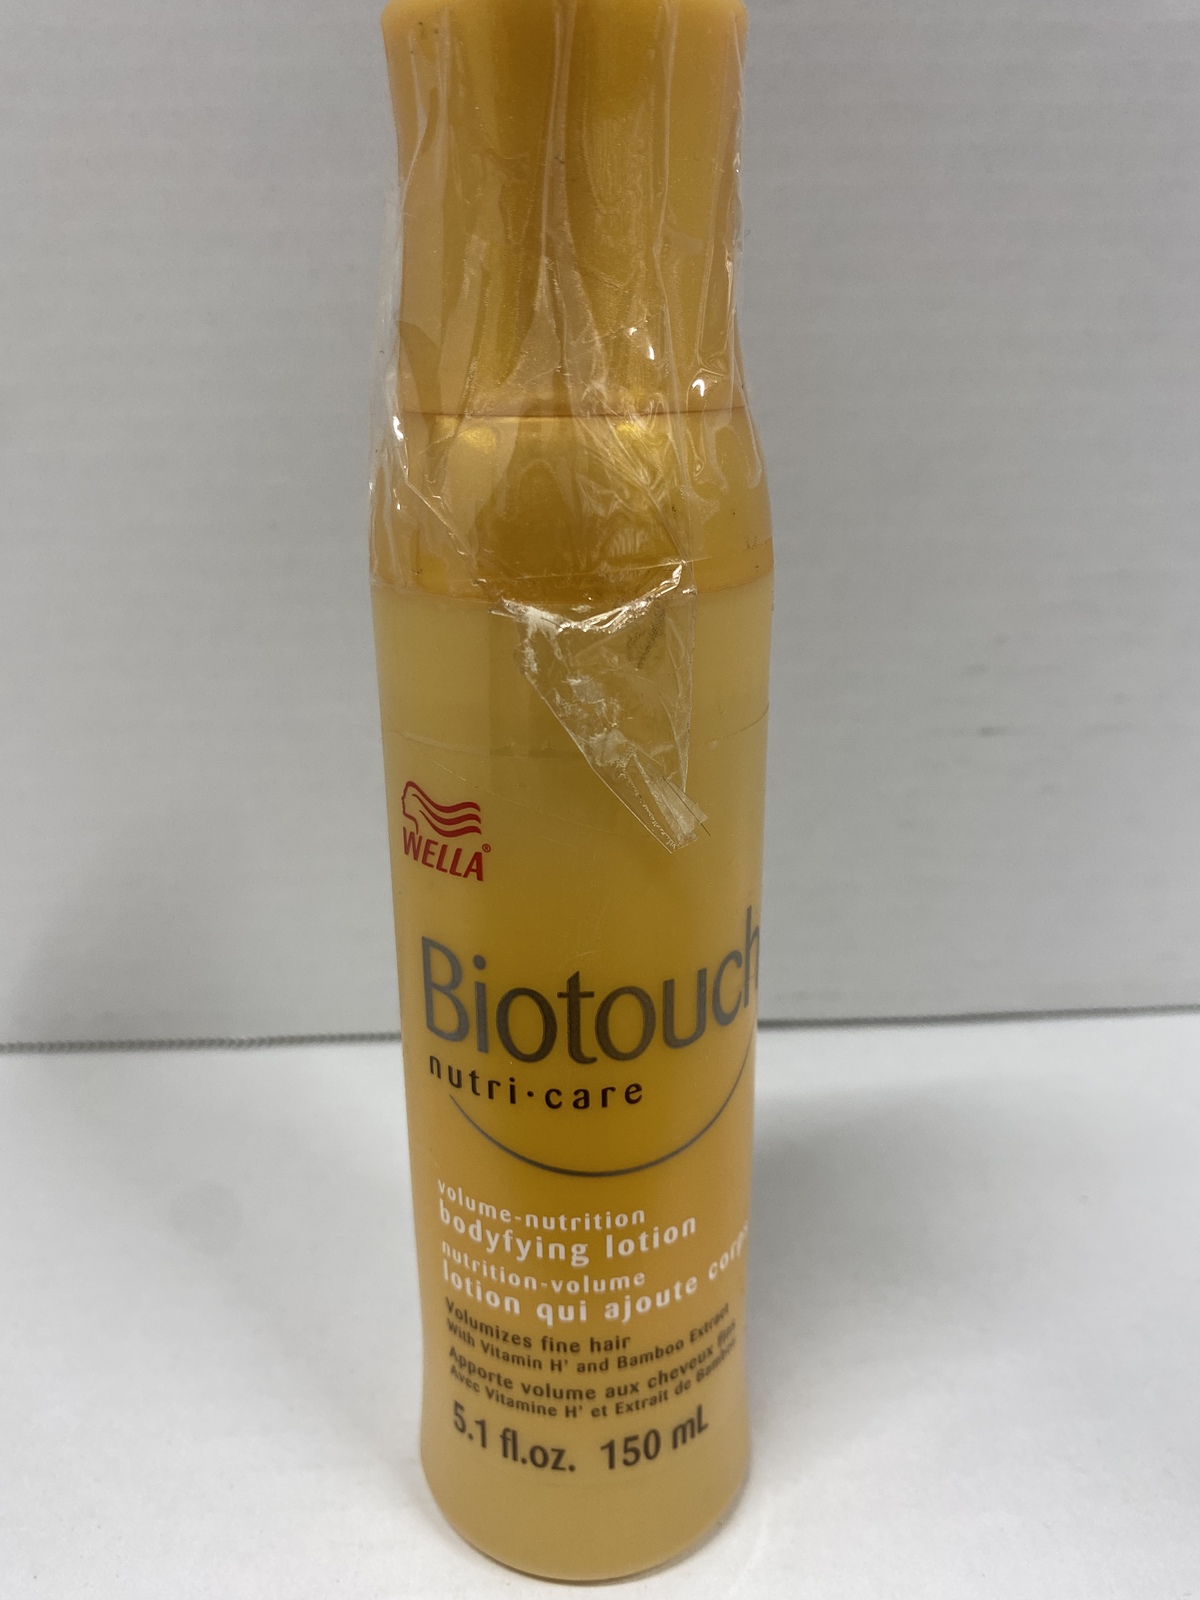 Primary image for Wella Biotouch Volume Nutrition Bodifying Lotion 5.1oz